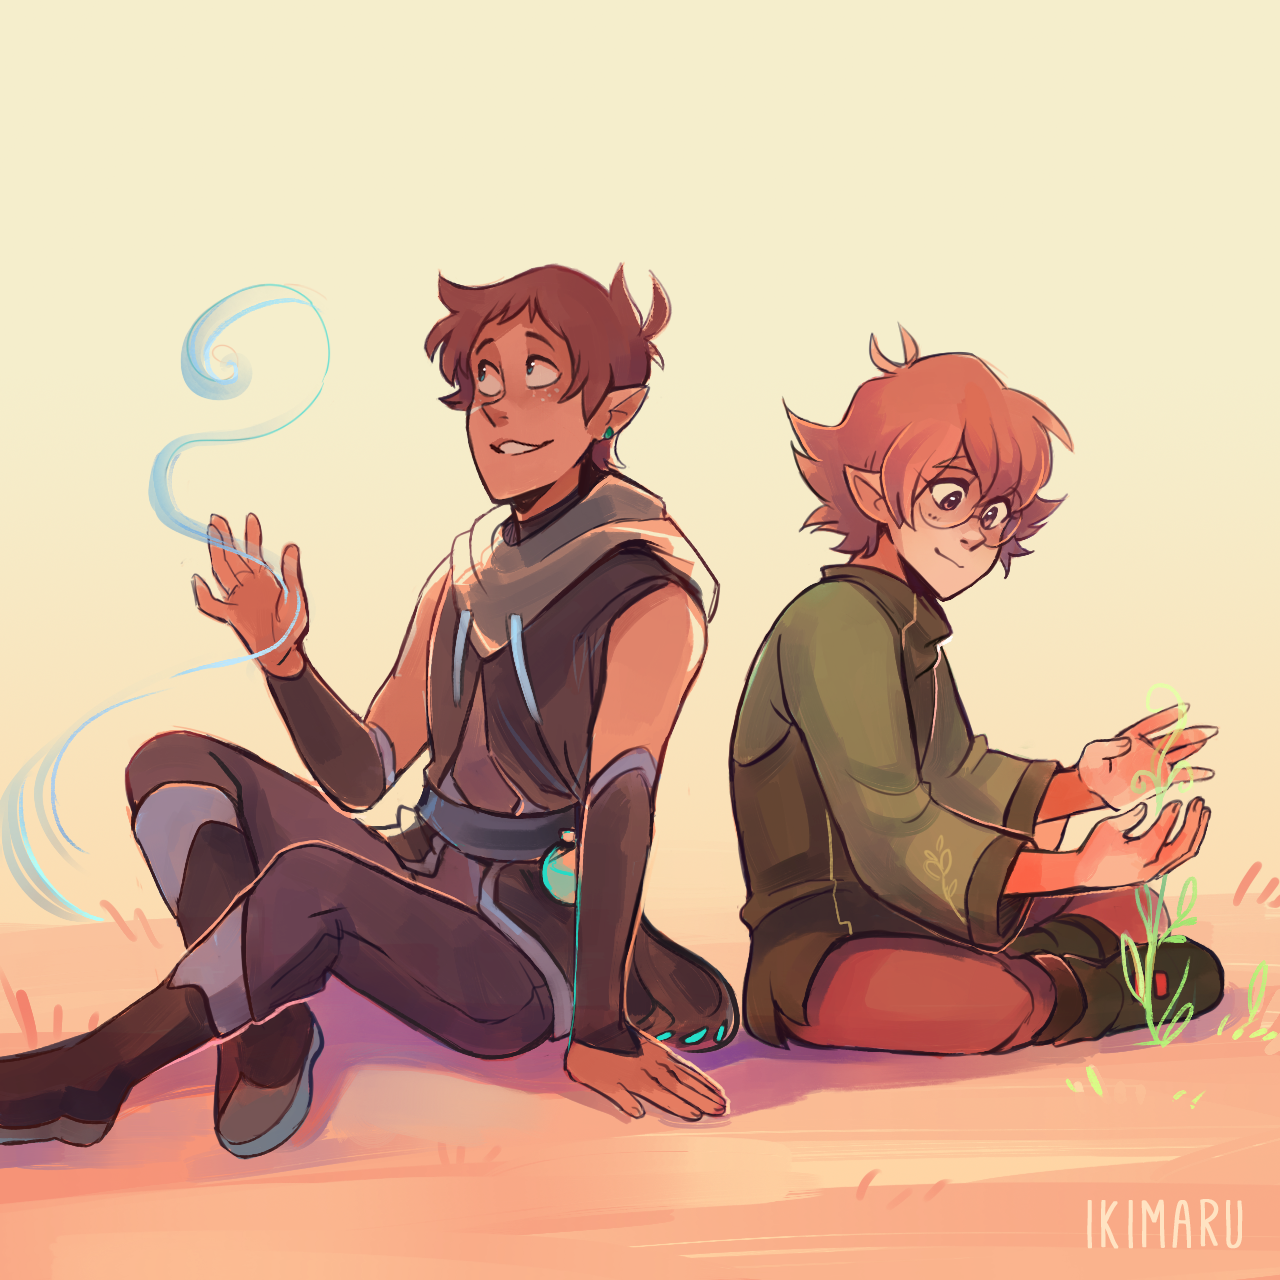 some more stuff about this au! c:Lance &amp; co are elemental nymps (or magic